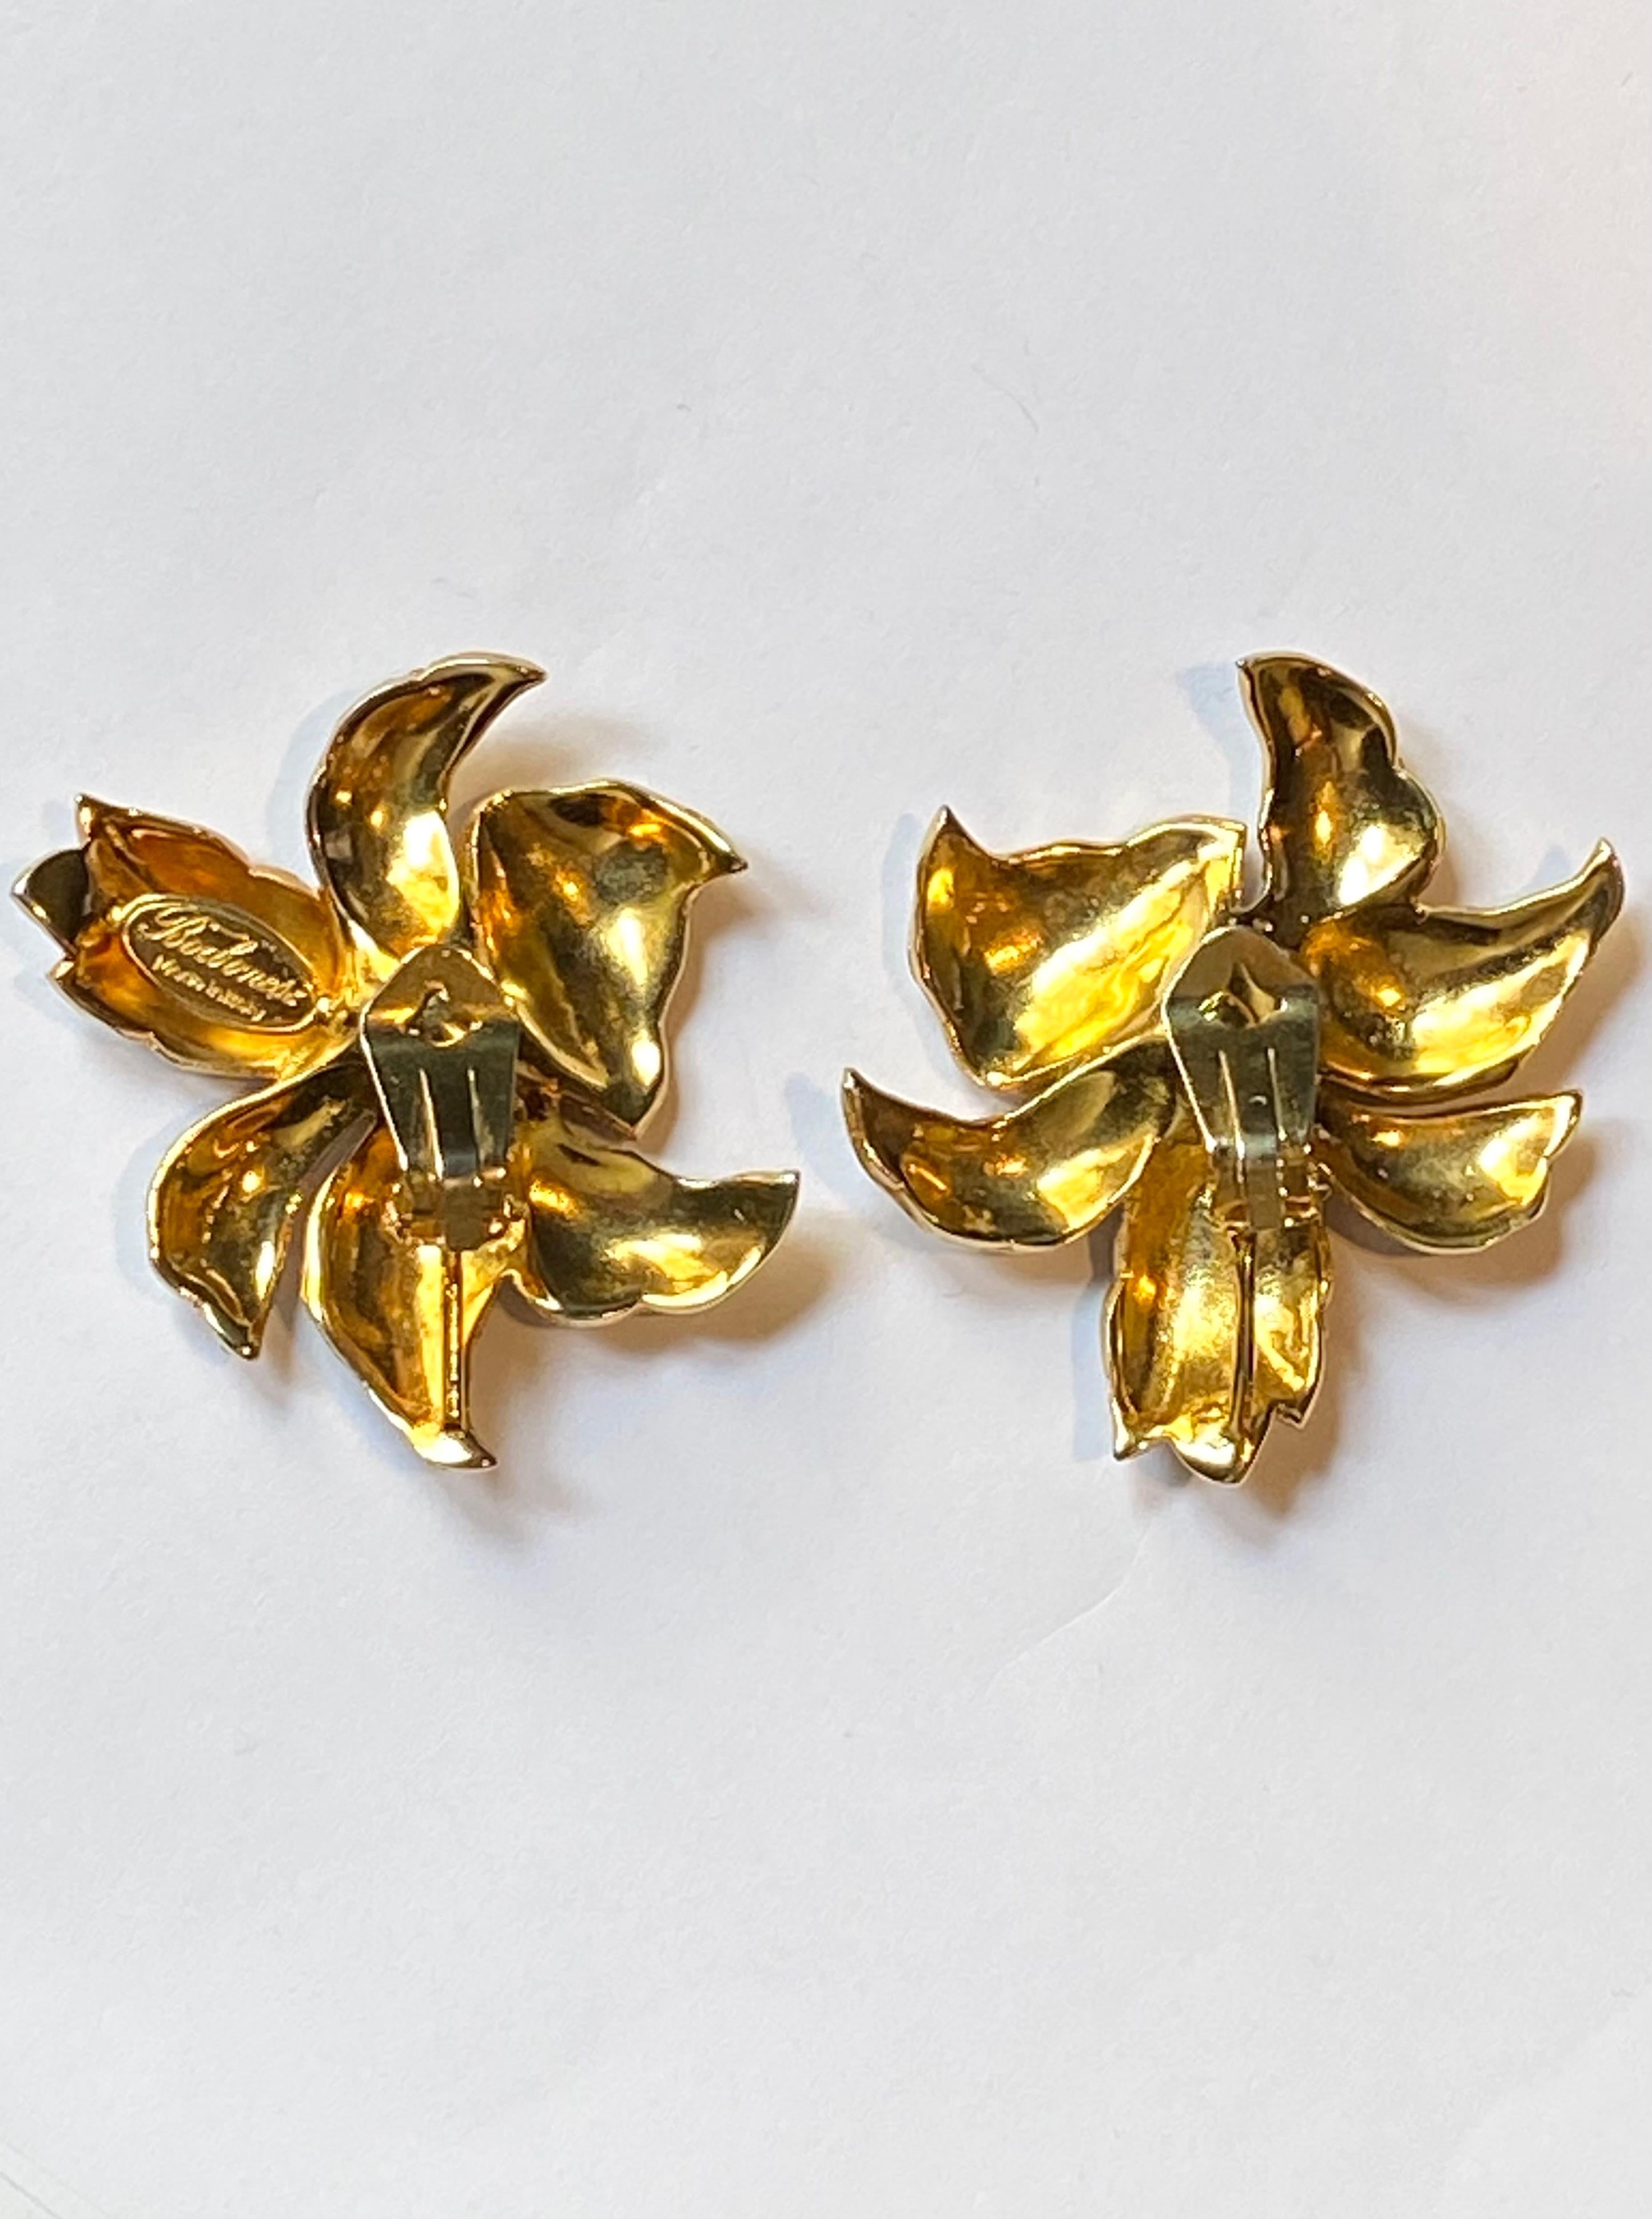 Borbonese, Italy Gold with Pave' Rhinestone Large Flower Earrings 10